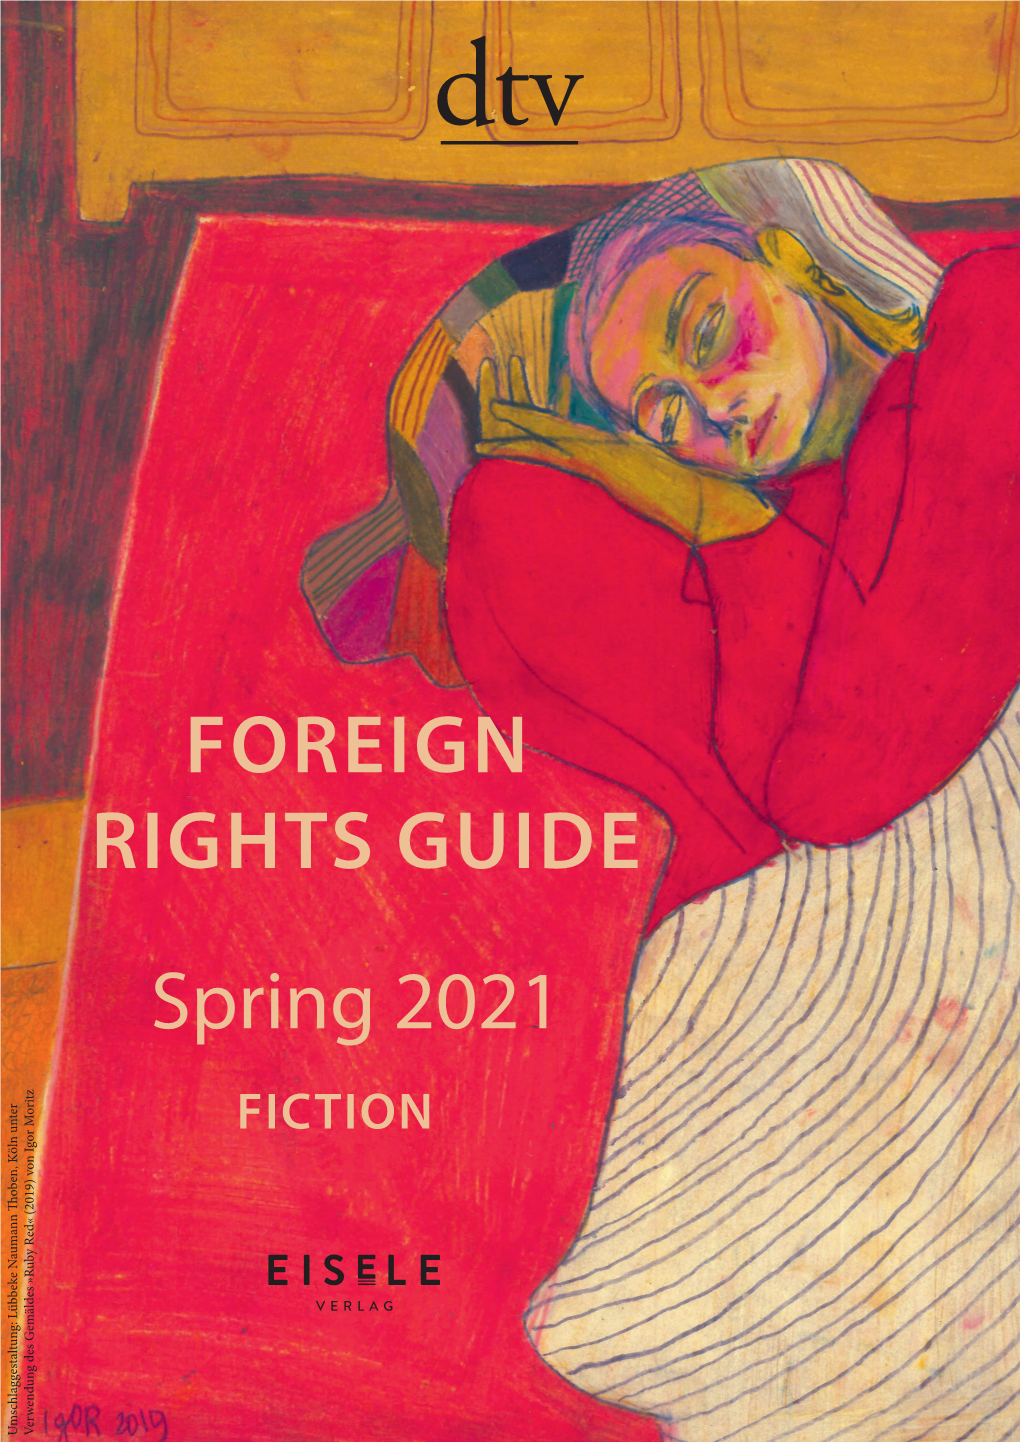 FOREIGN RIGHTS GUIDE Spring 2021